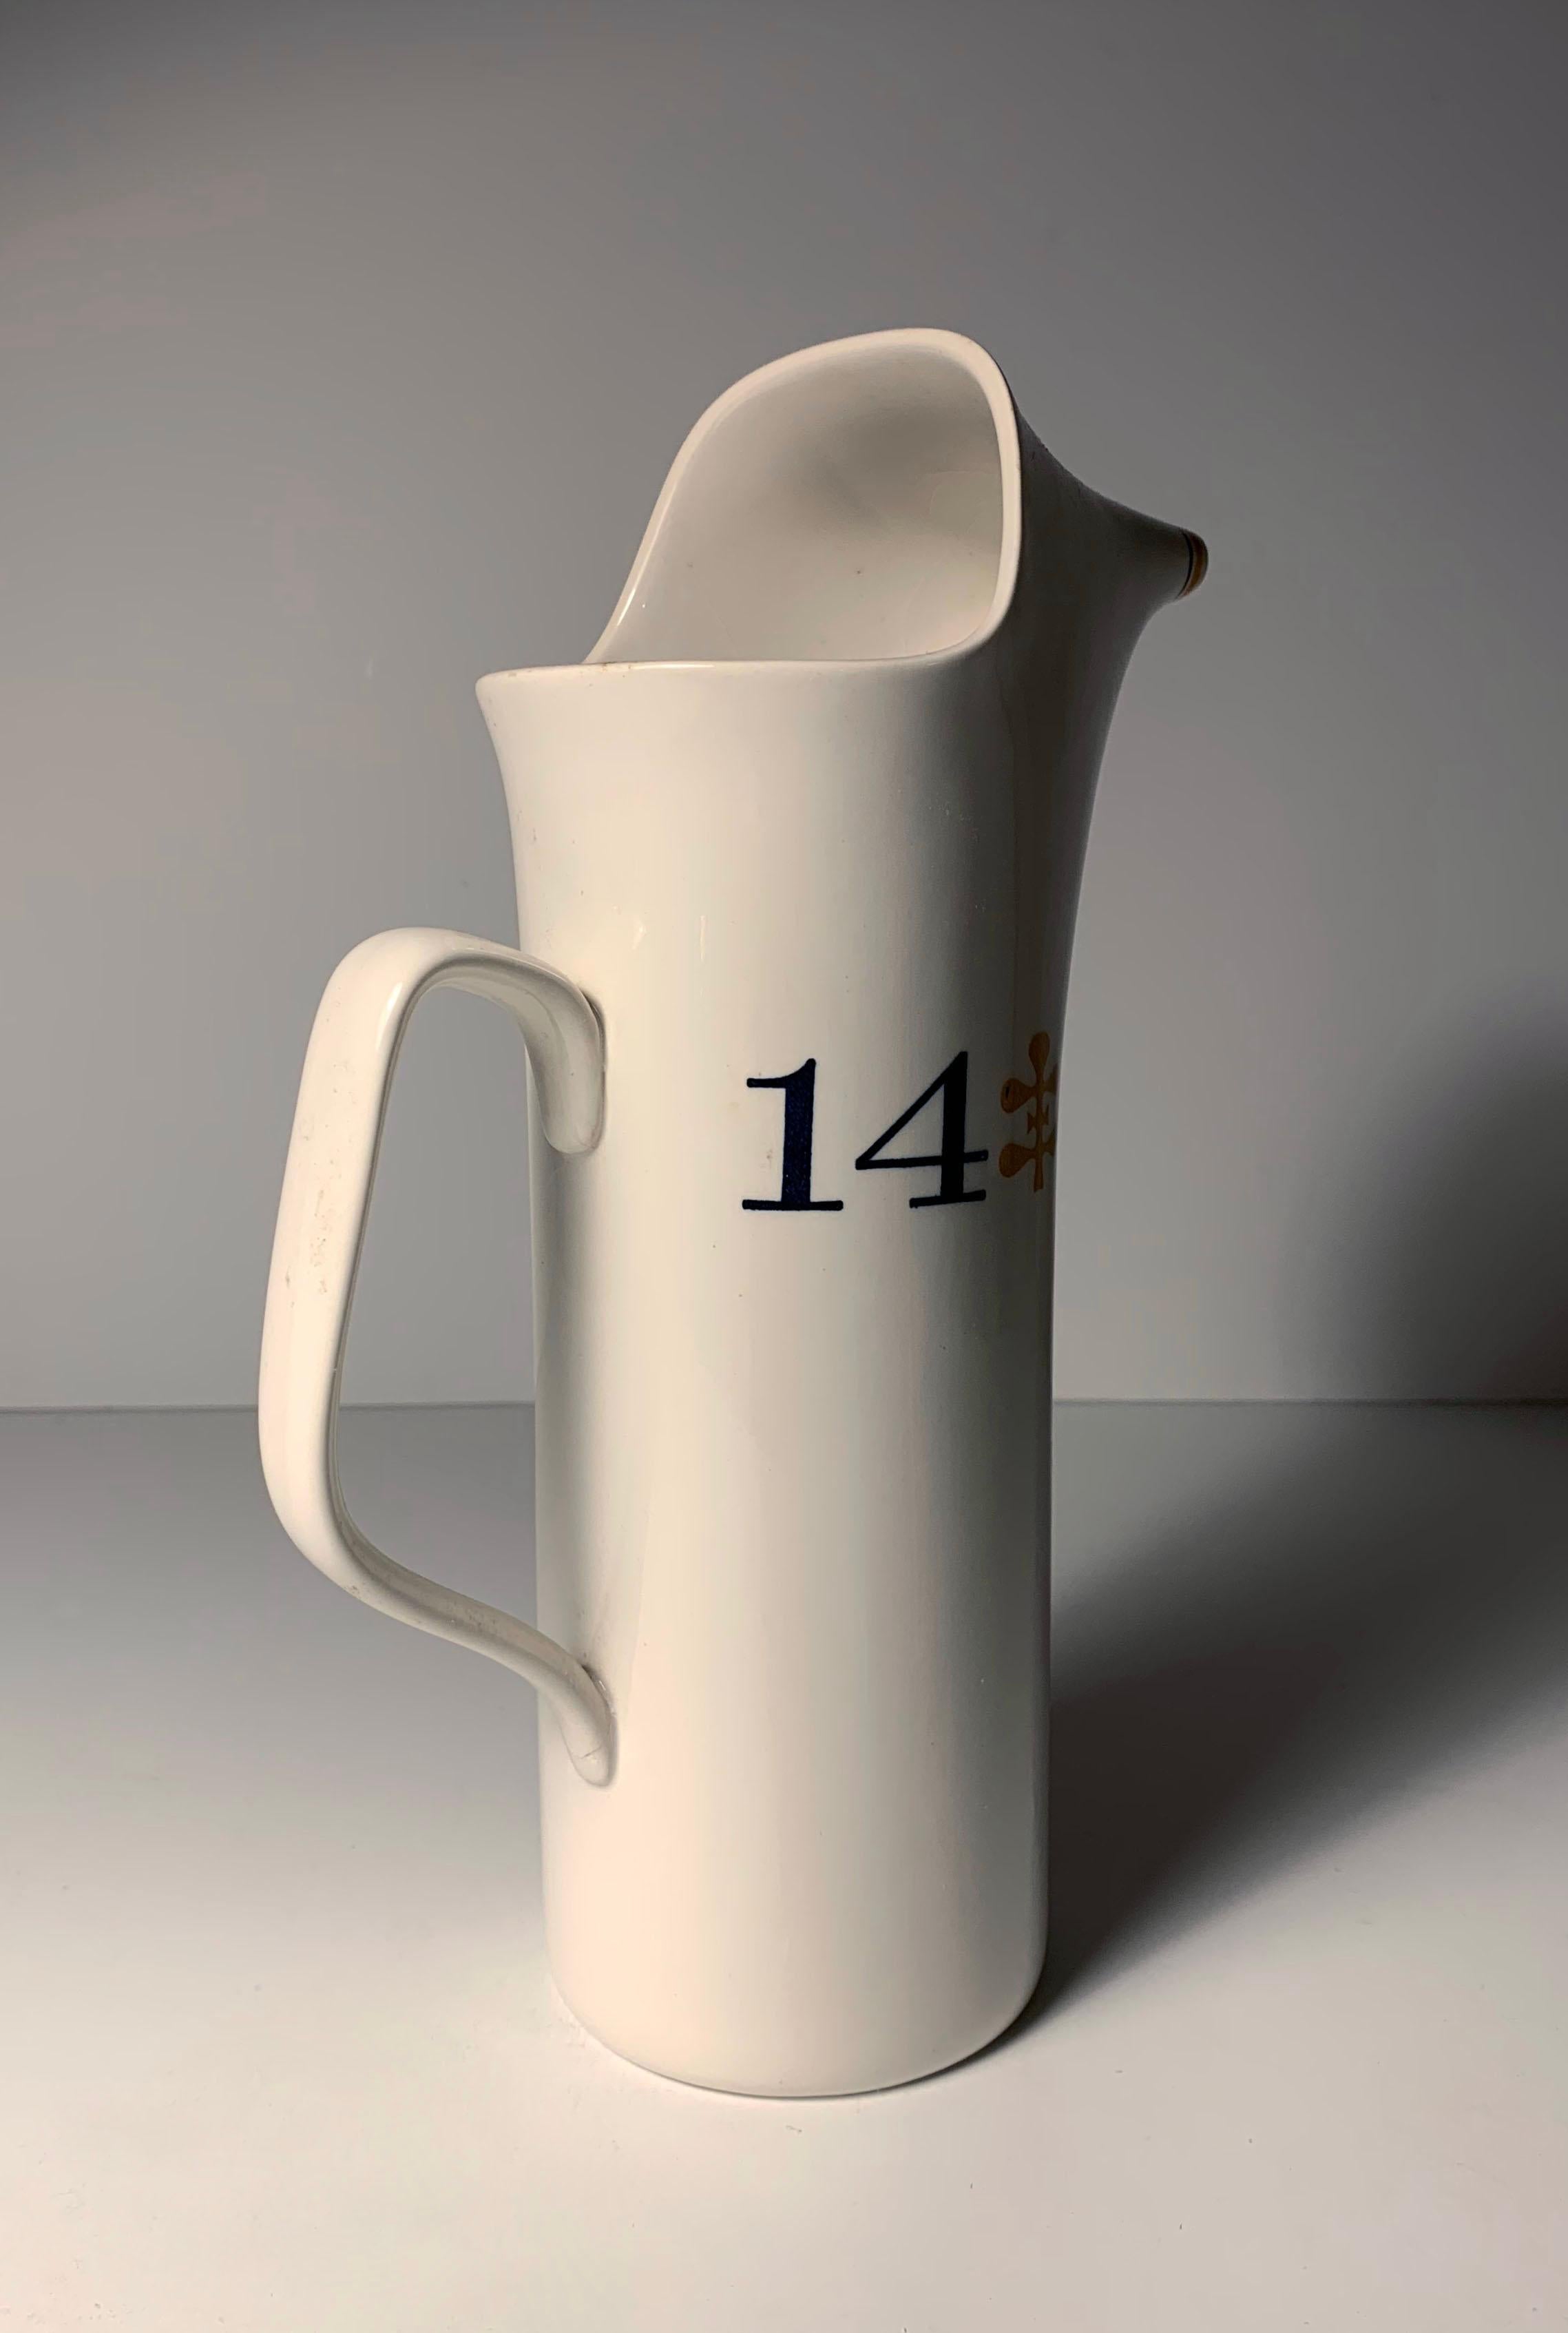 American Early LaGardo Tackett Measuring Pitcher with Graphics For Sale